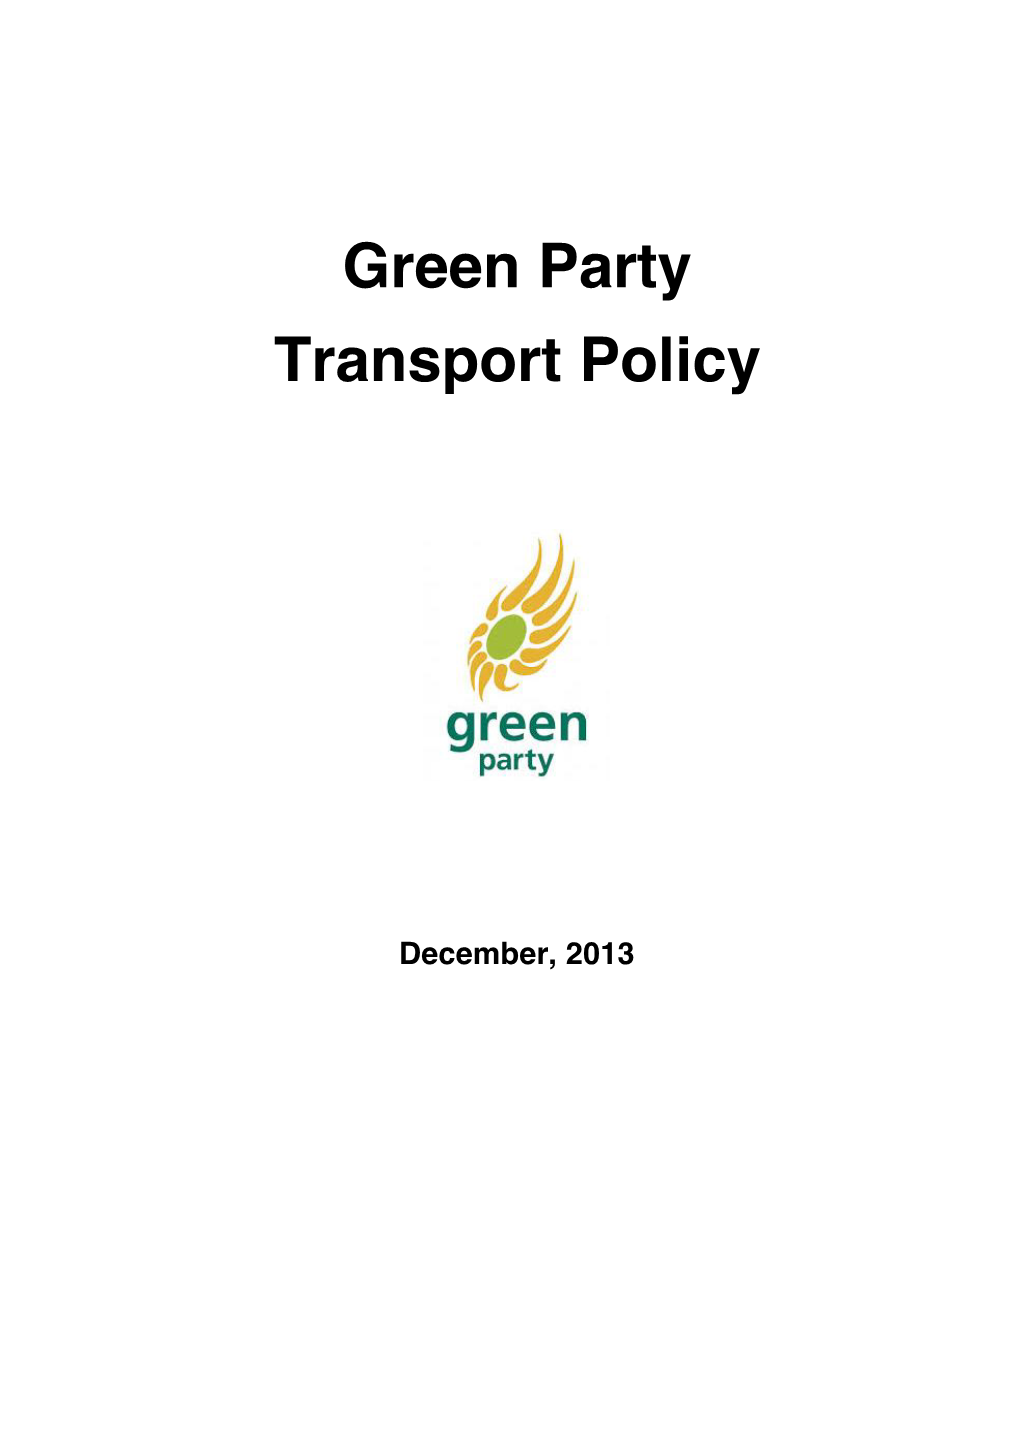 Green Party Transport Policy